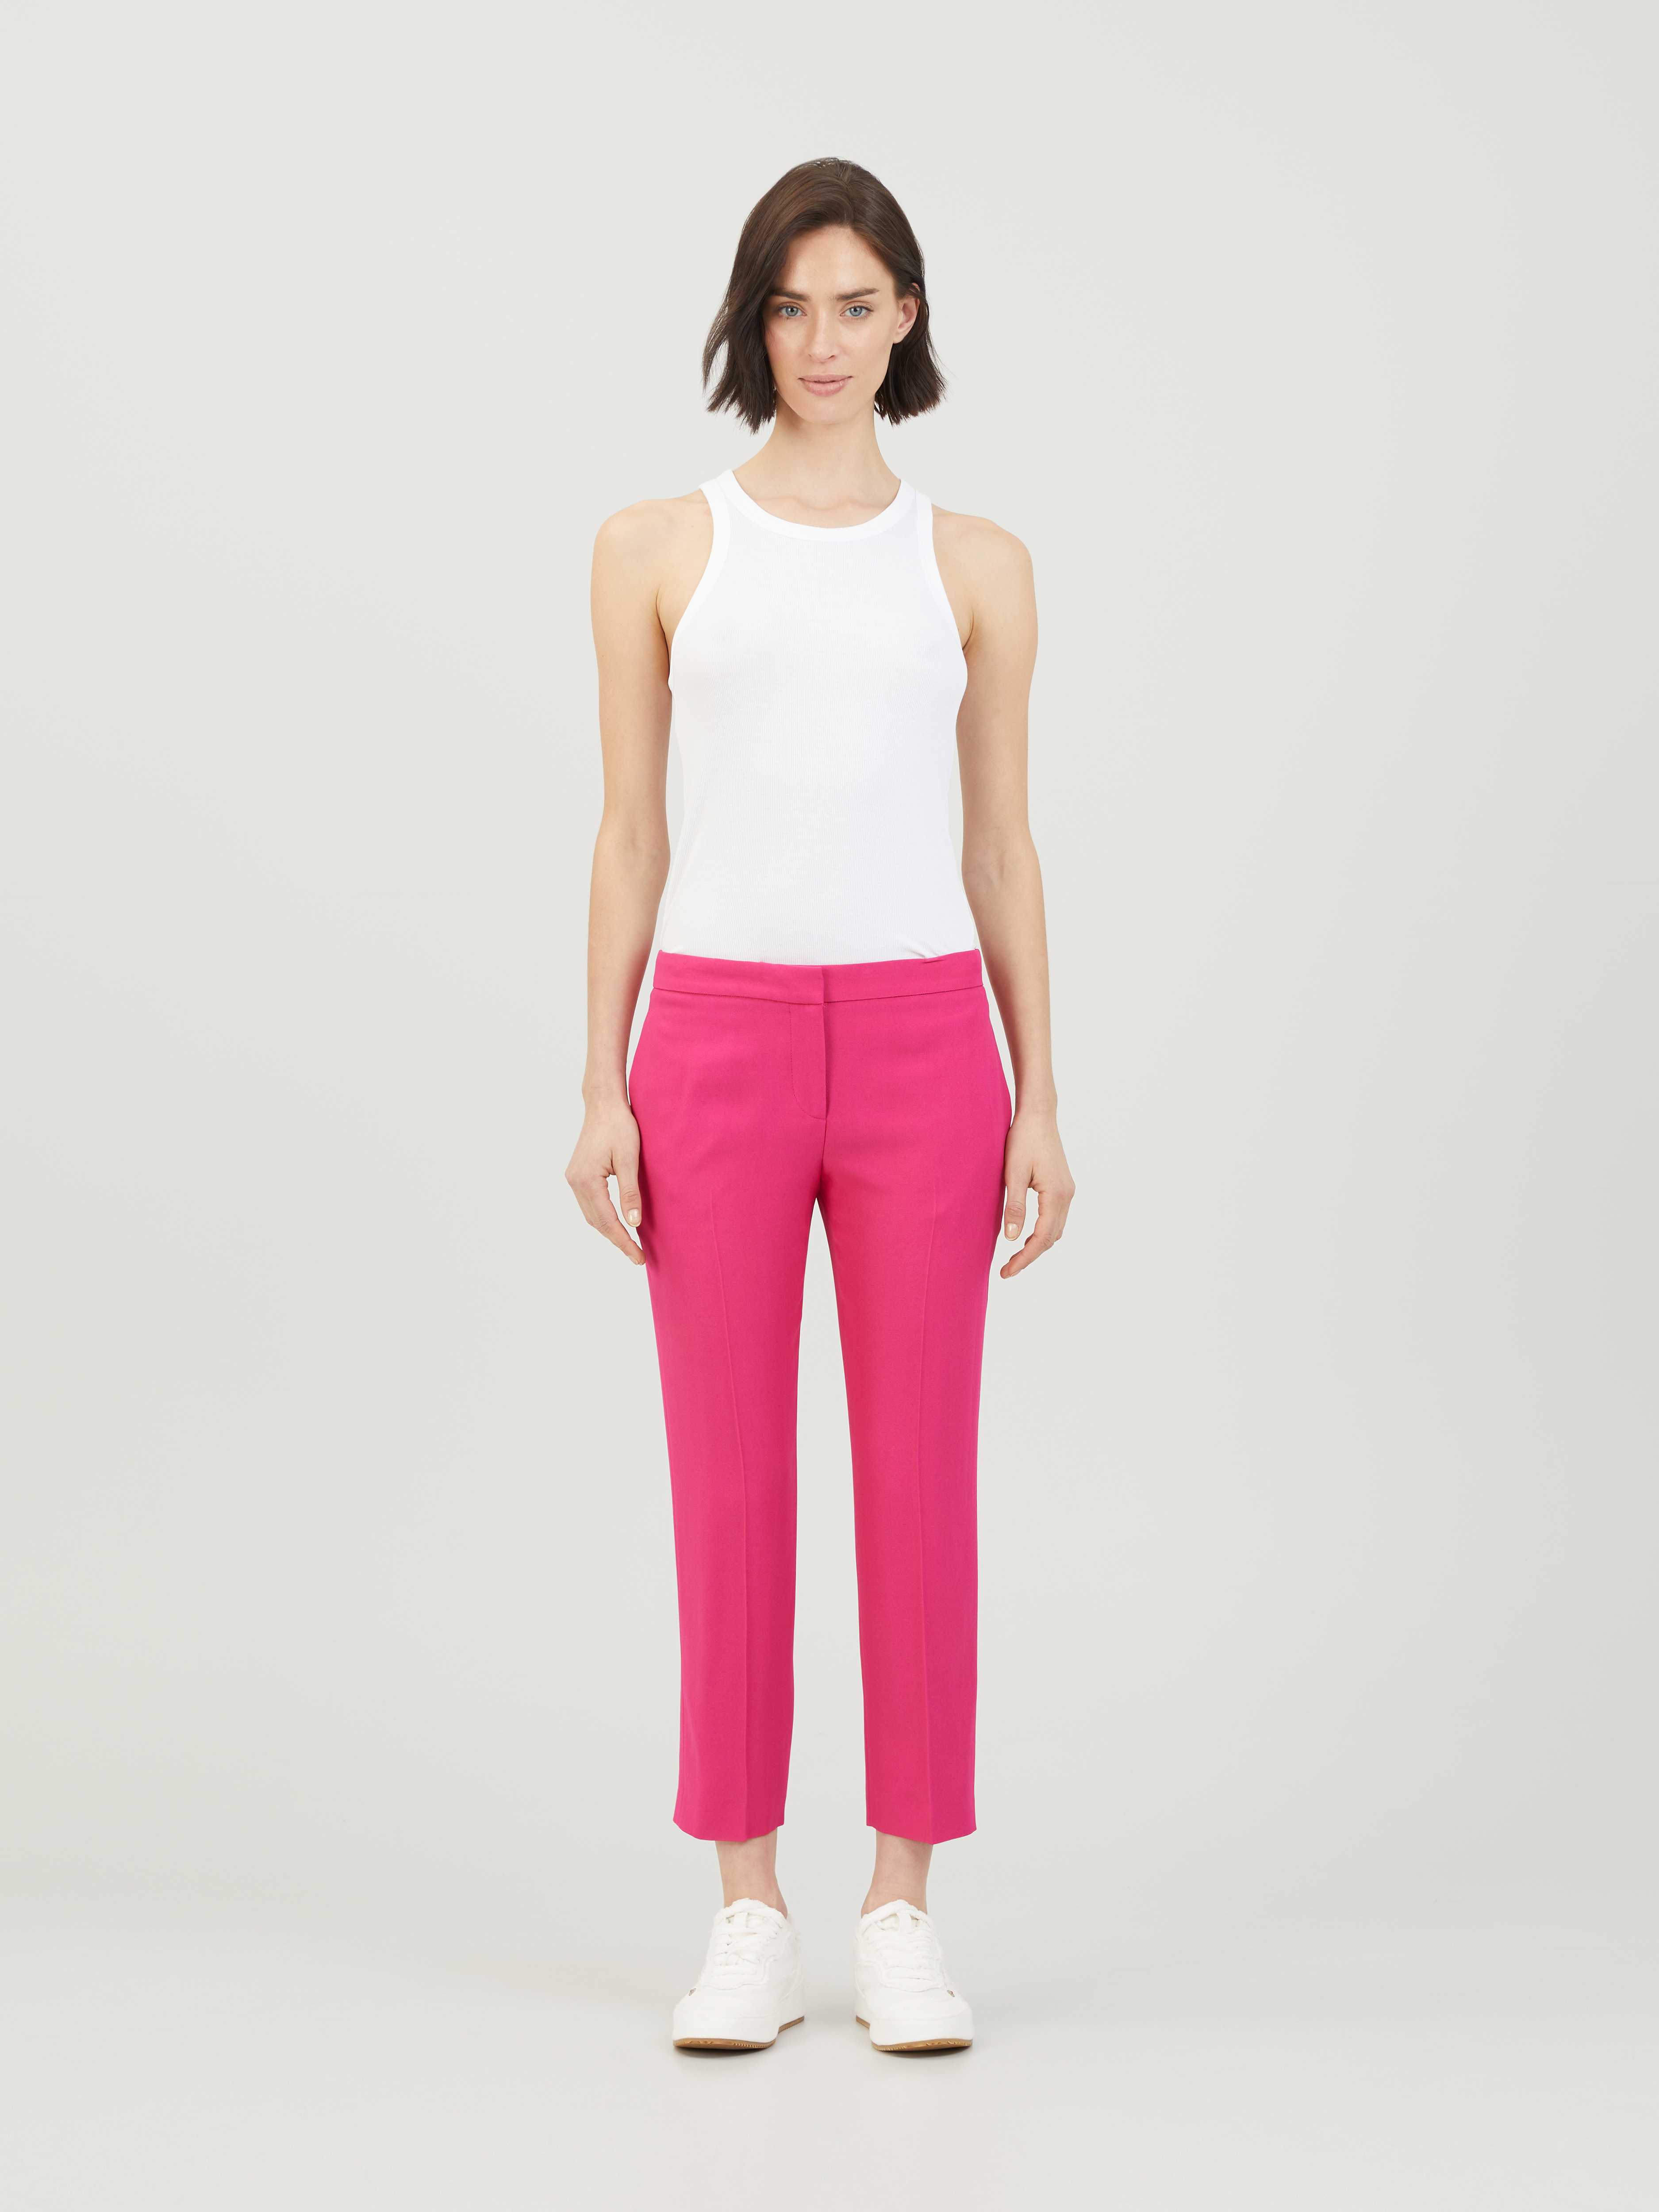 Buy Edith Fabri Kurti Cigarette Pants - (Pink Color) Free Size at Amazon.in